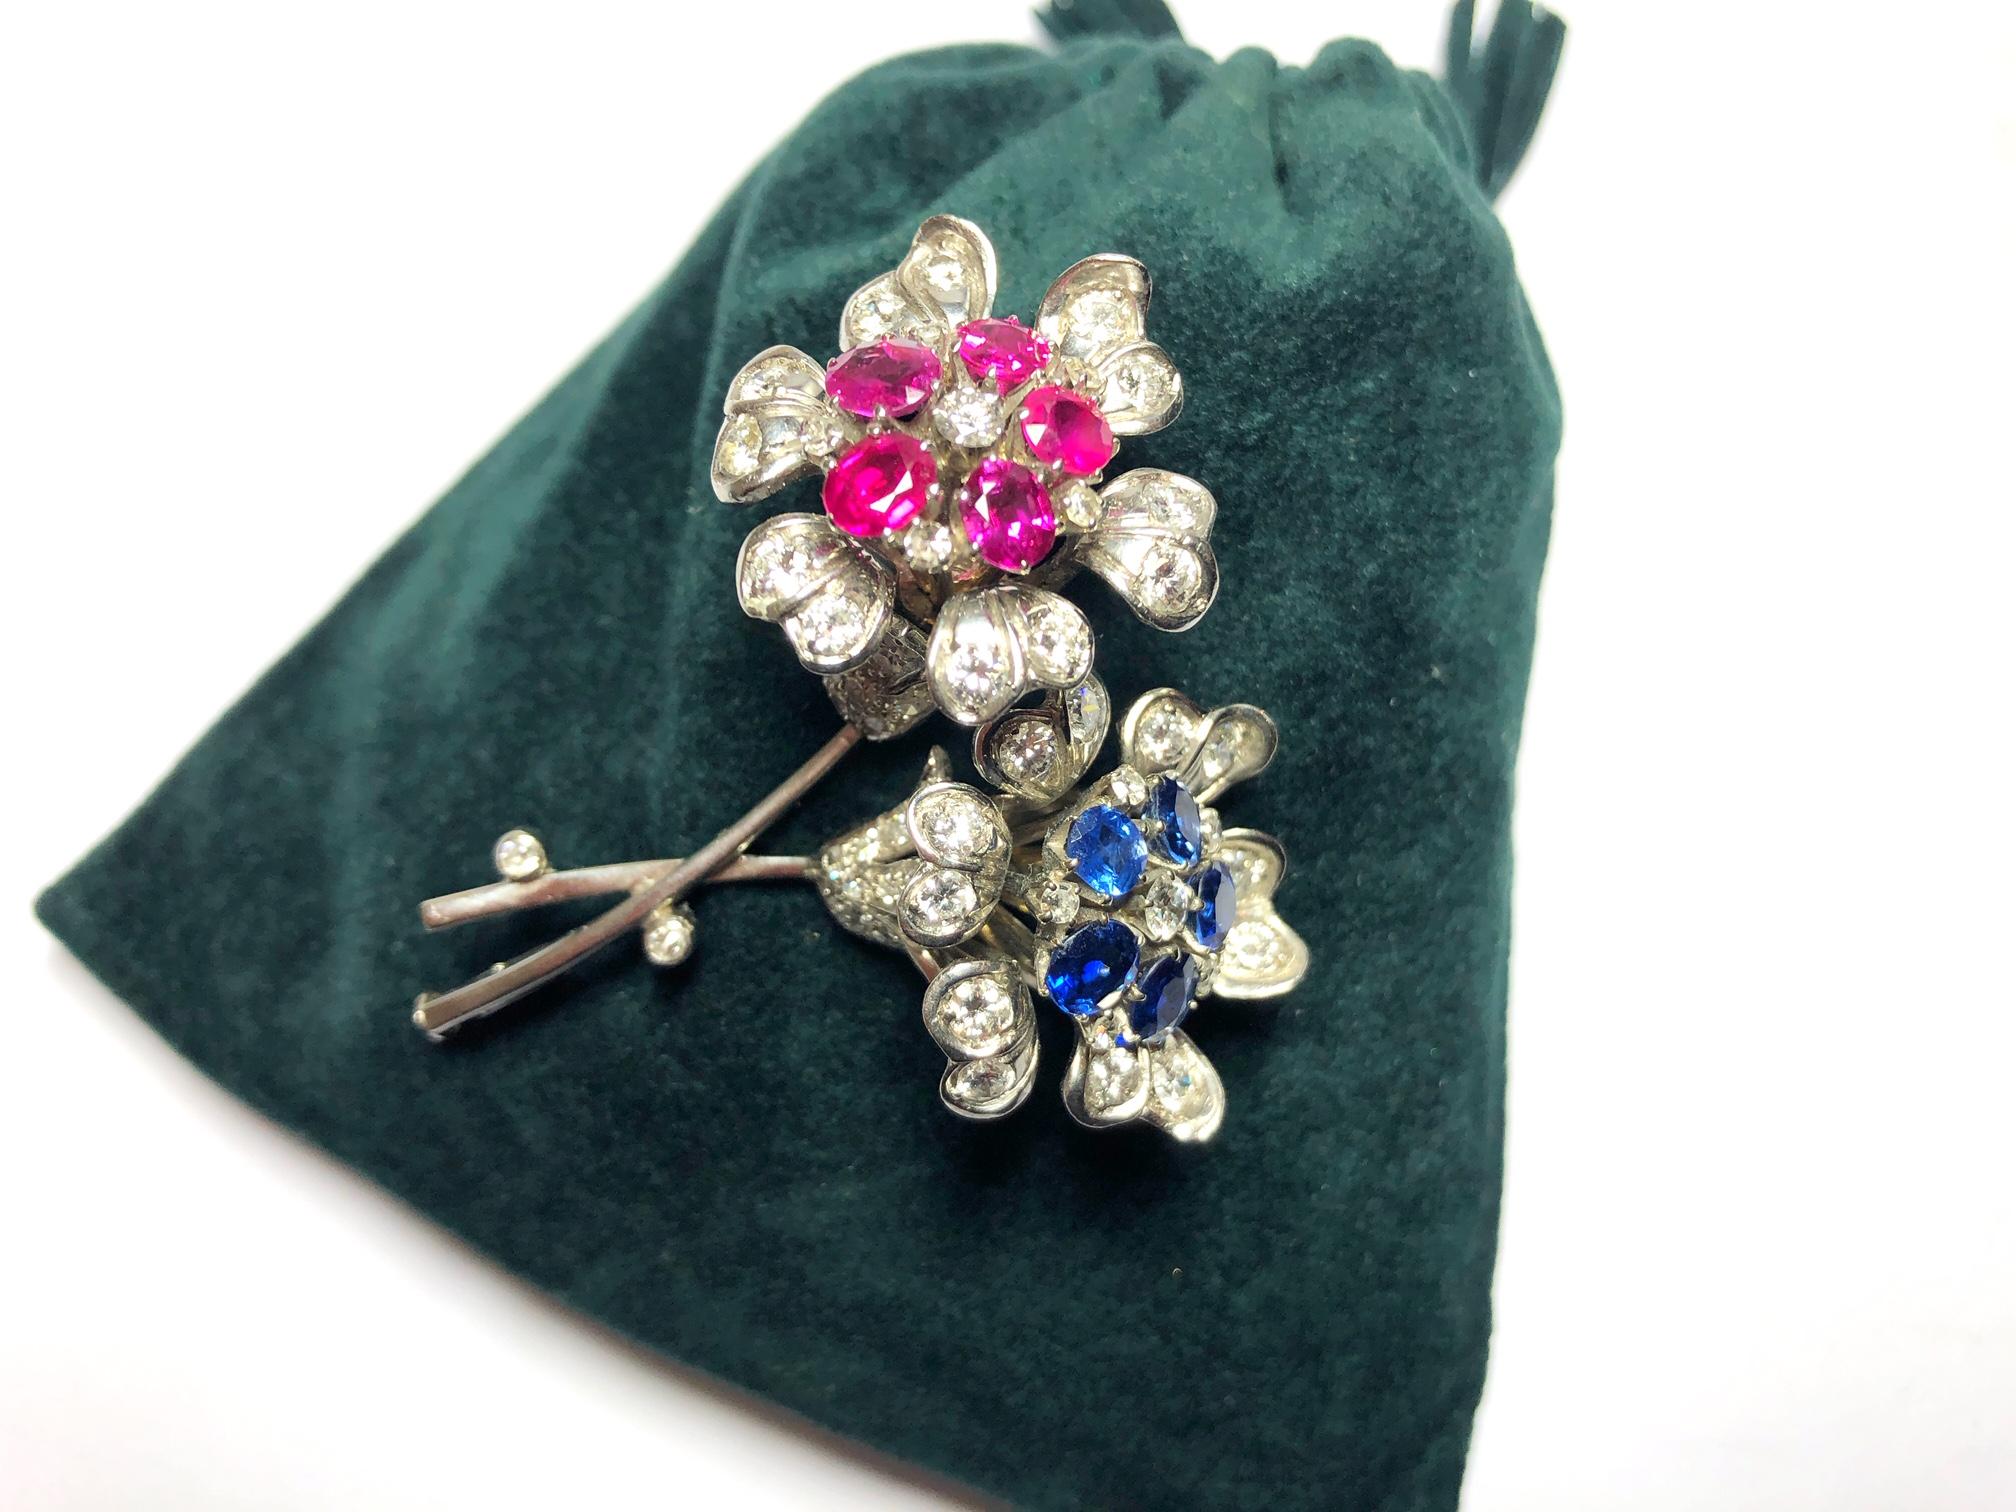 A vintage double headed flower brooch, set with round brilliant and eight-cut diamonds, with rubies in the centre of one flower and sapphires in the centre of the other, mounted in 14ct white gold.